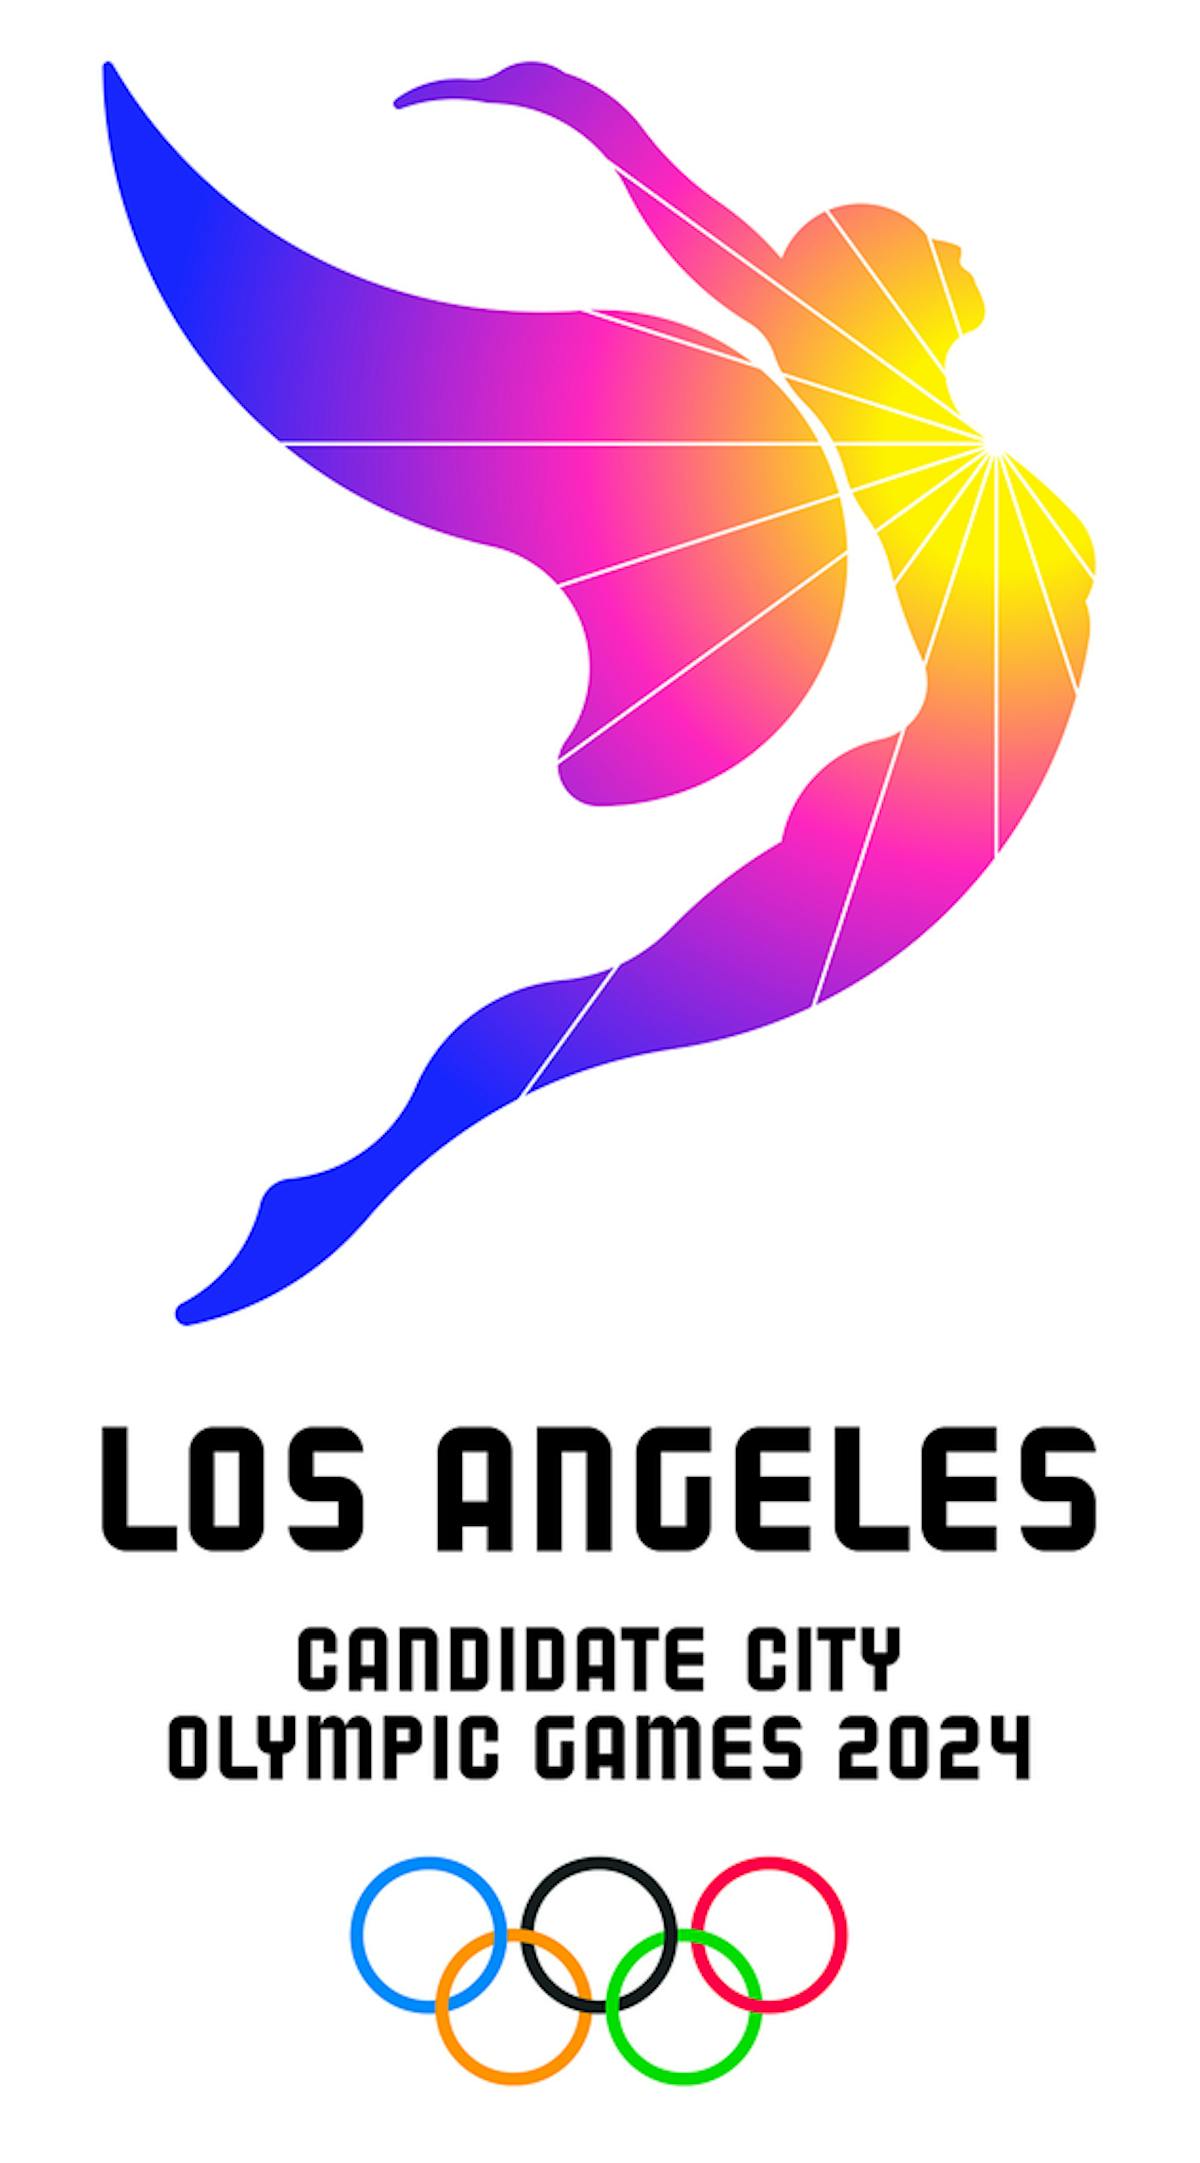 LA 2024 plays up a sunny disposition in their logo for the Olympic bid | News | Archinect